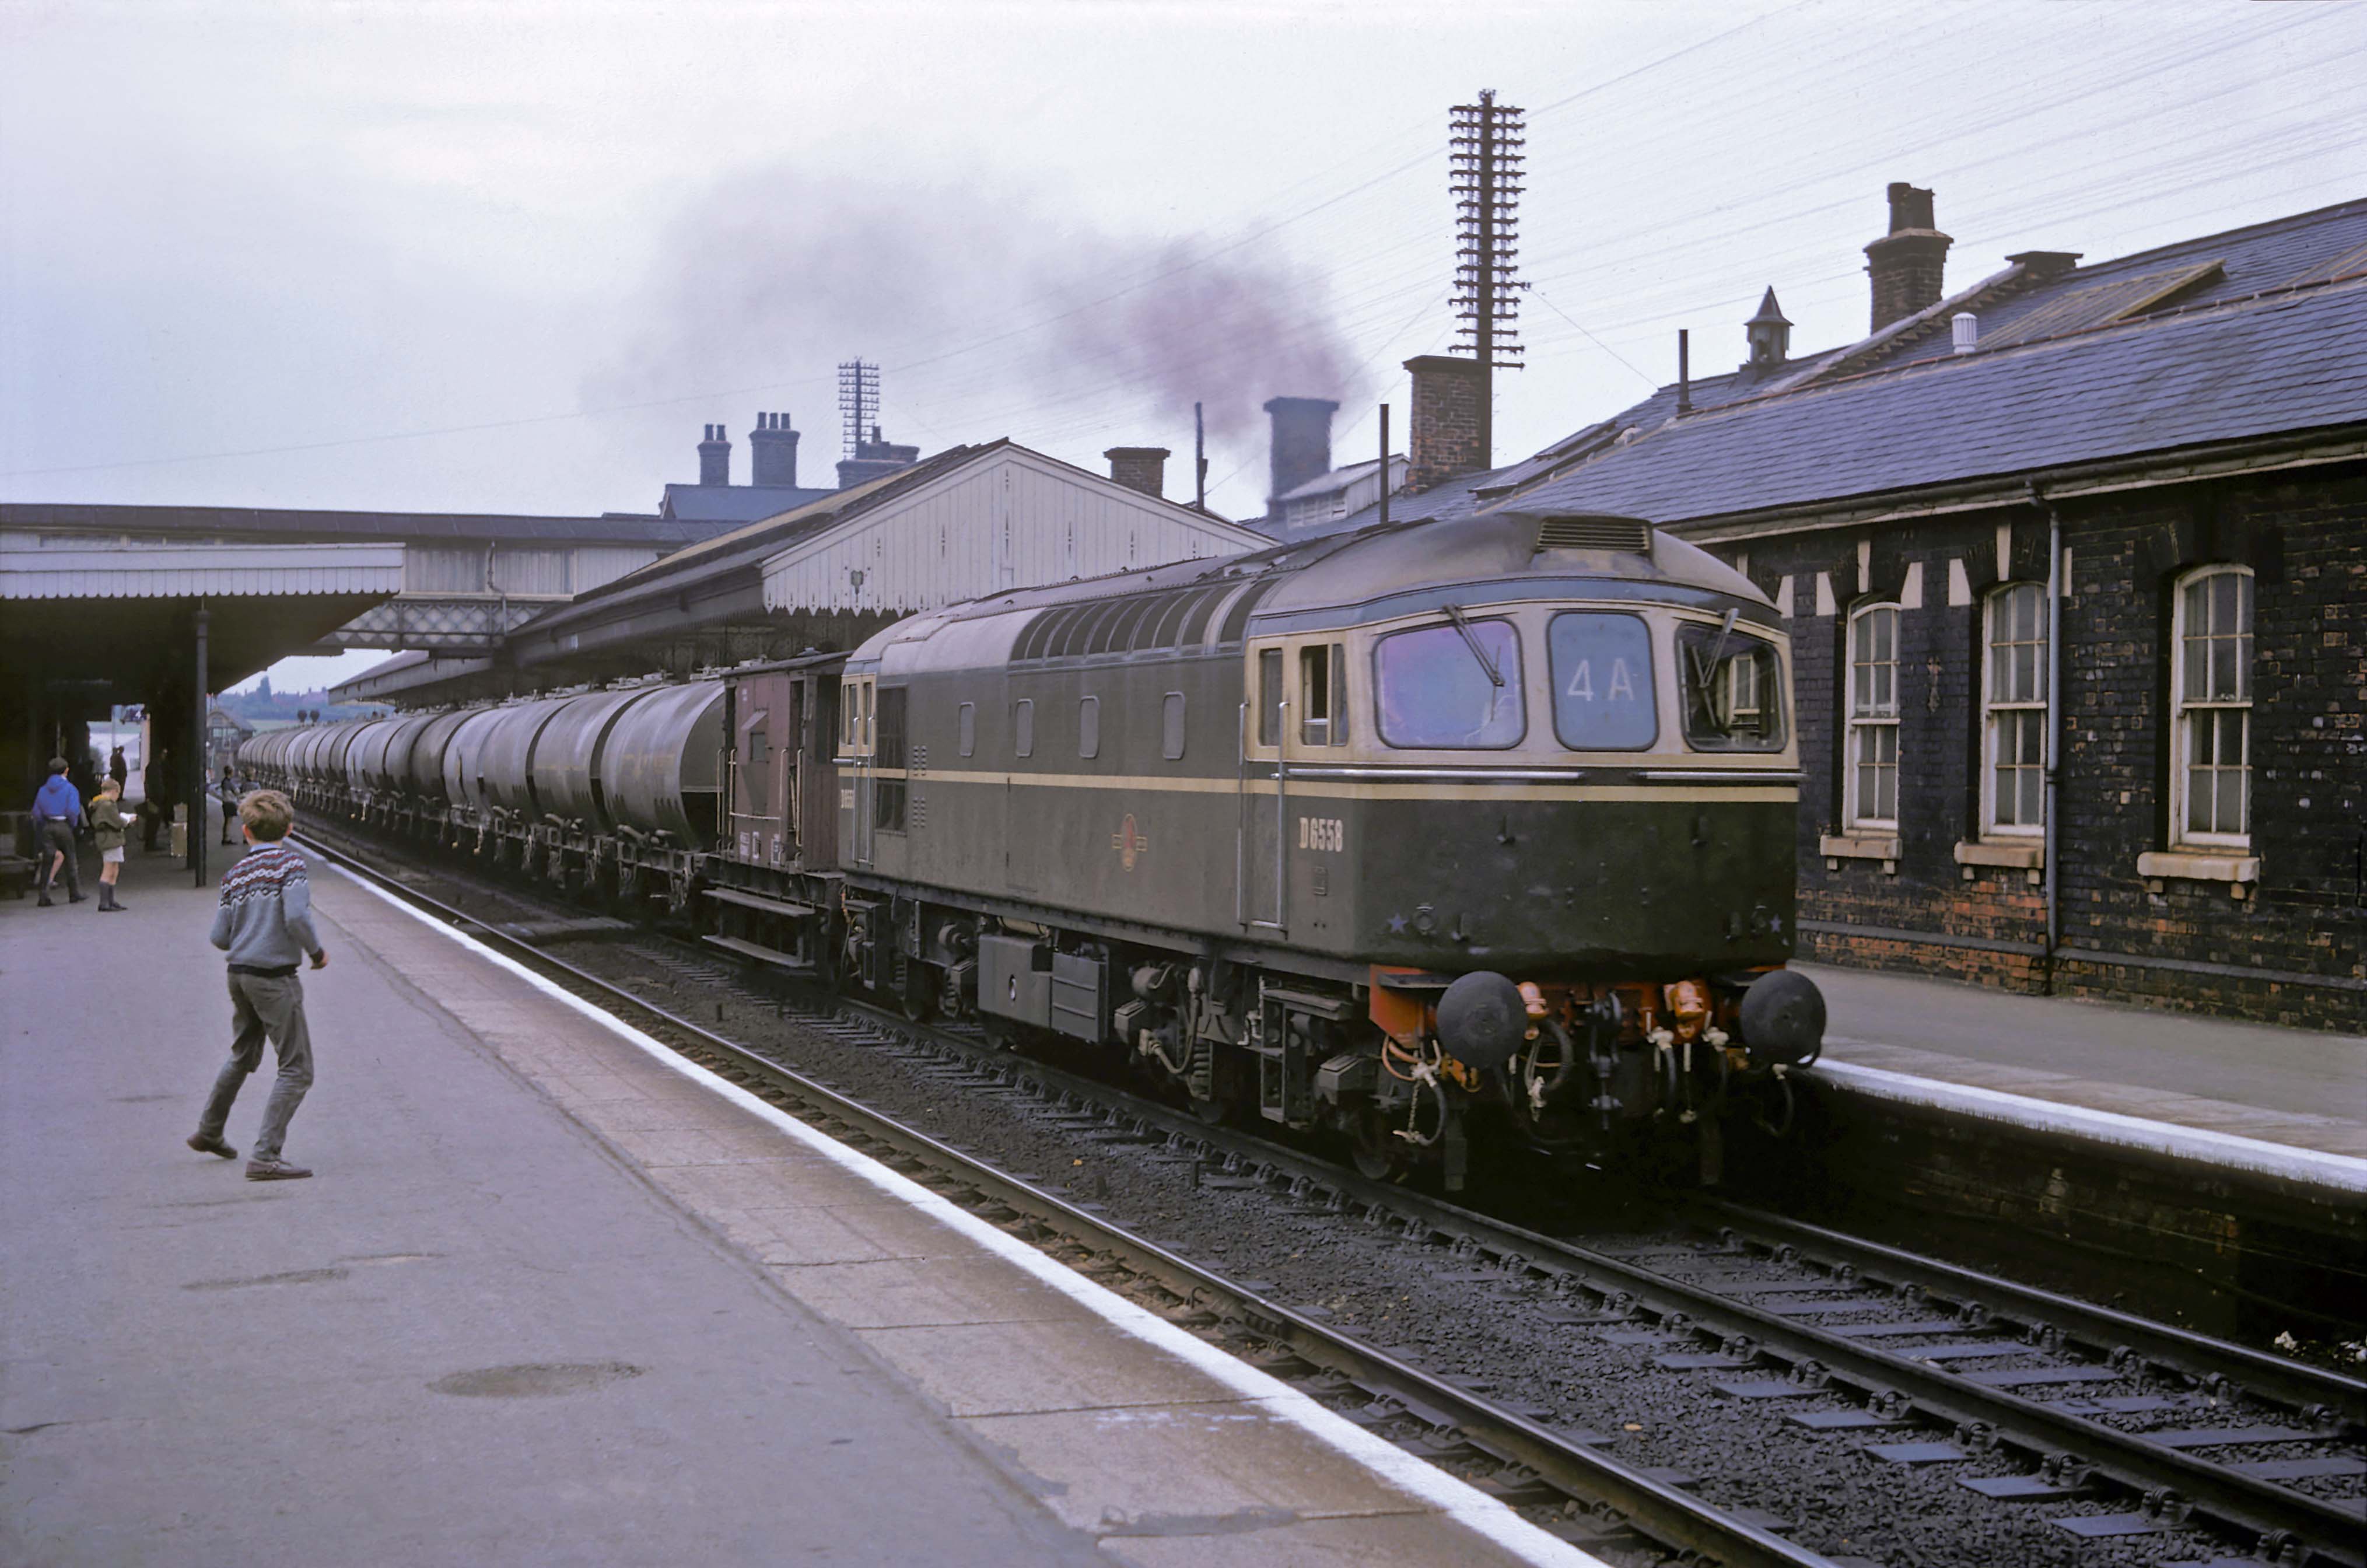 In August or September 1965 a southbound train of empty cement wagons is hauled by BRCW Type 3 (later Class 33) diesel electric locomotive No. D6558, based on the Southern Region. The cement train was always eagerly anticipated among spotters because these locomotives were not otherwise seen in the Midlands. Photograph by Cedric A. Clayson, © John Clayson